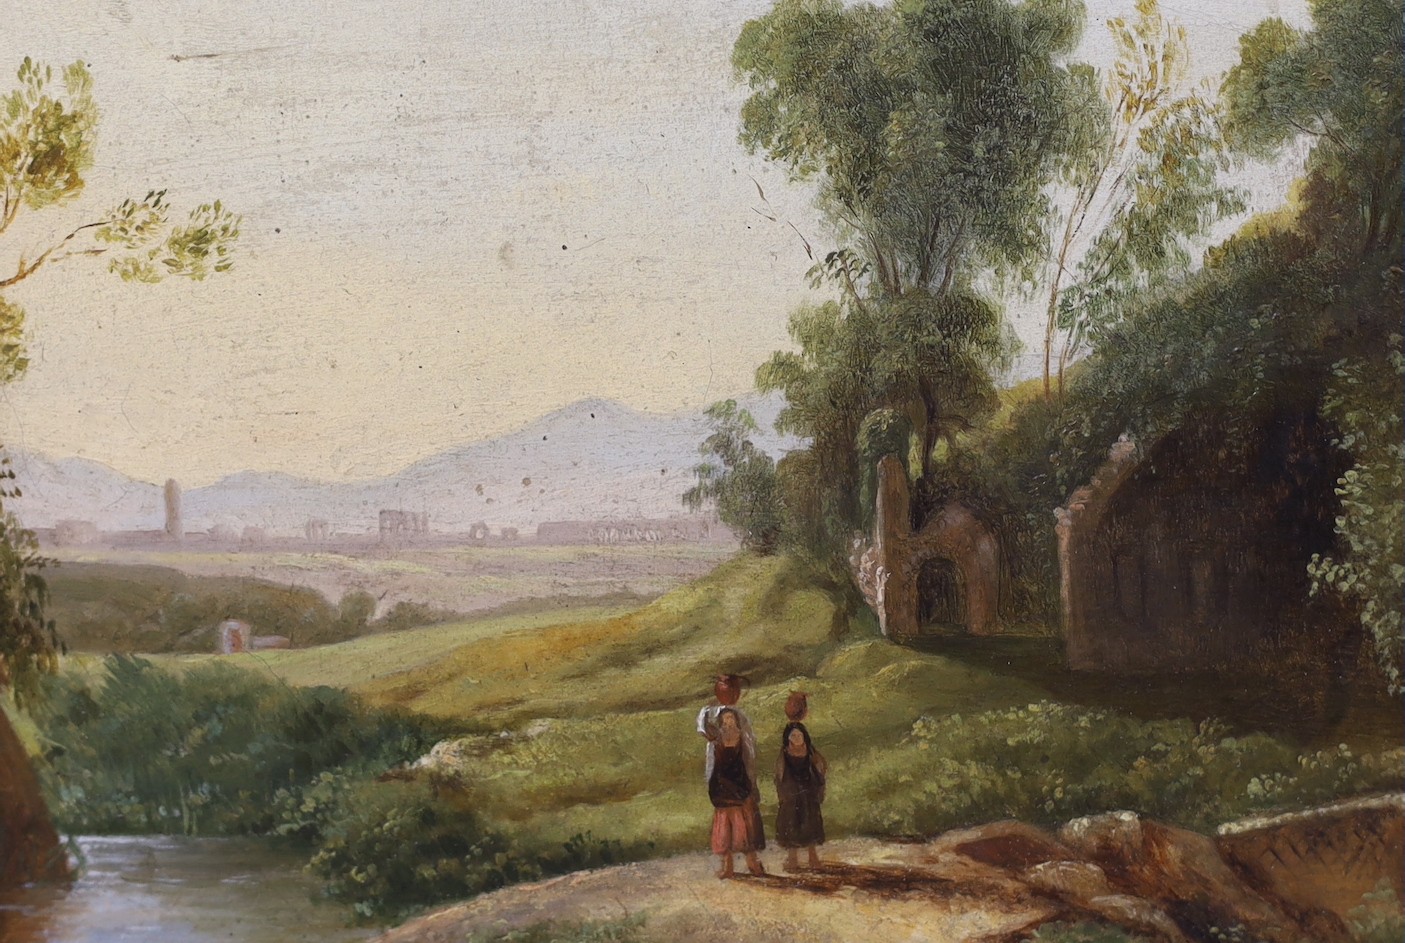 19th century English School, oil on card, Italianate landscape with watercarriers in the foreground, ruins beyond, 11.5 x 16.5cm